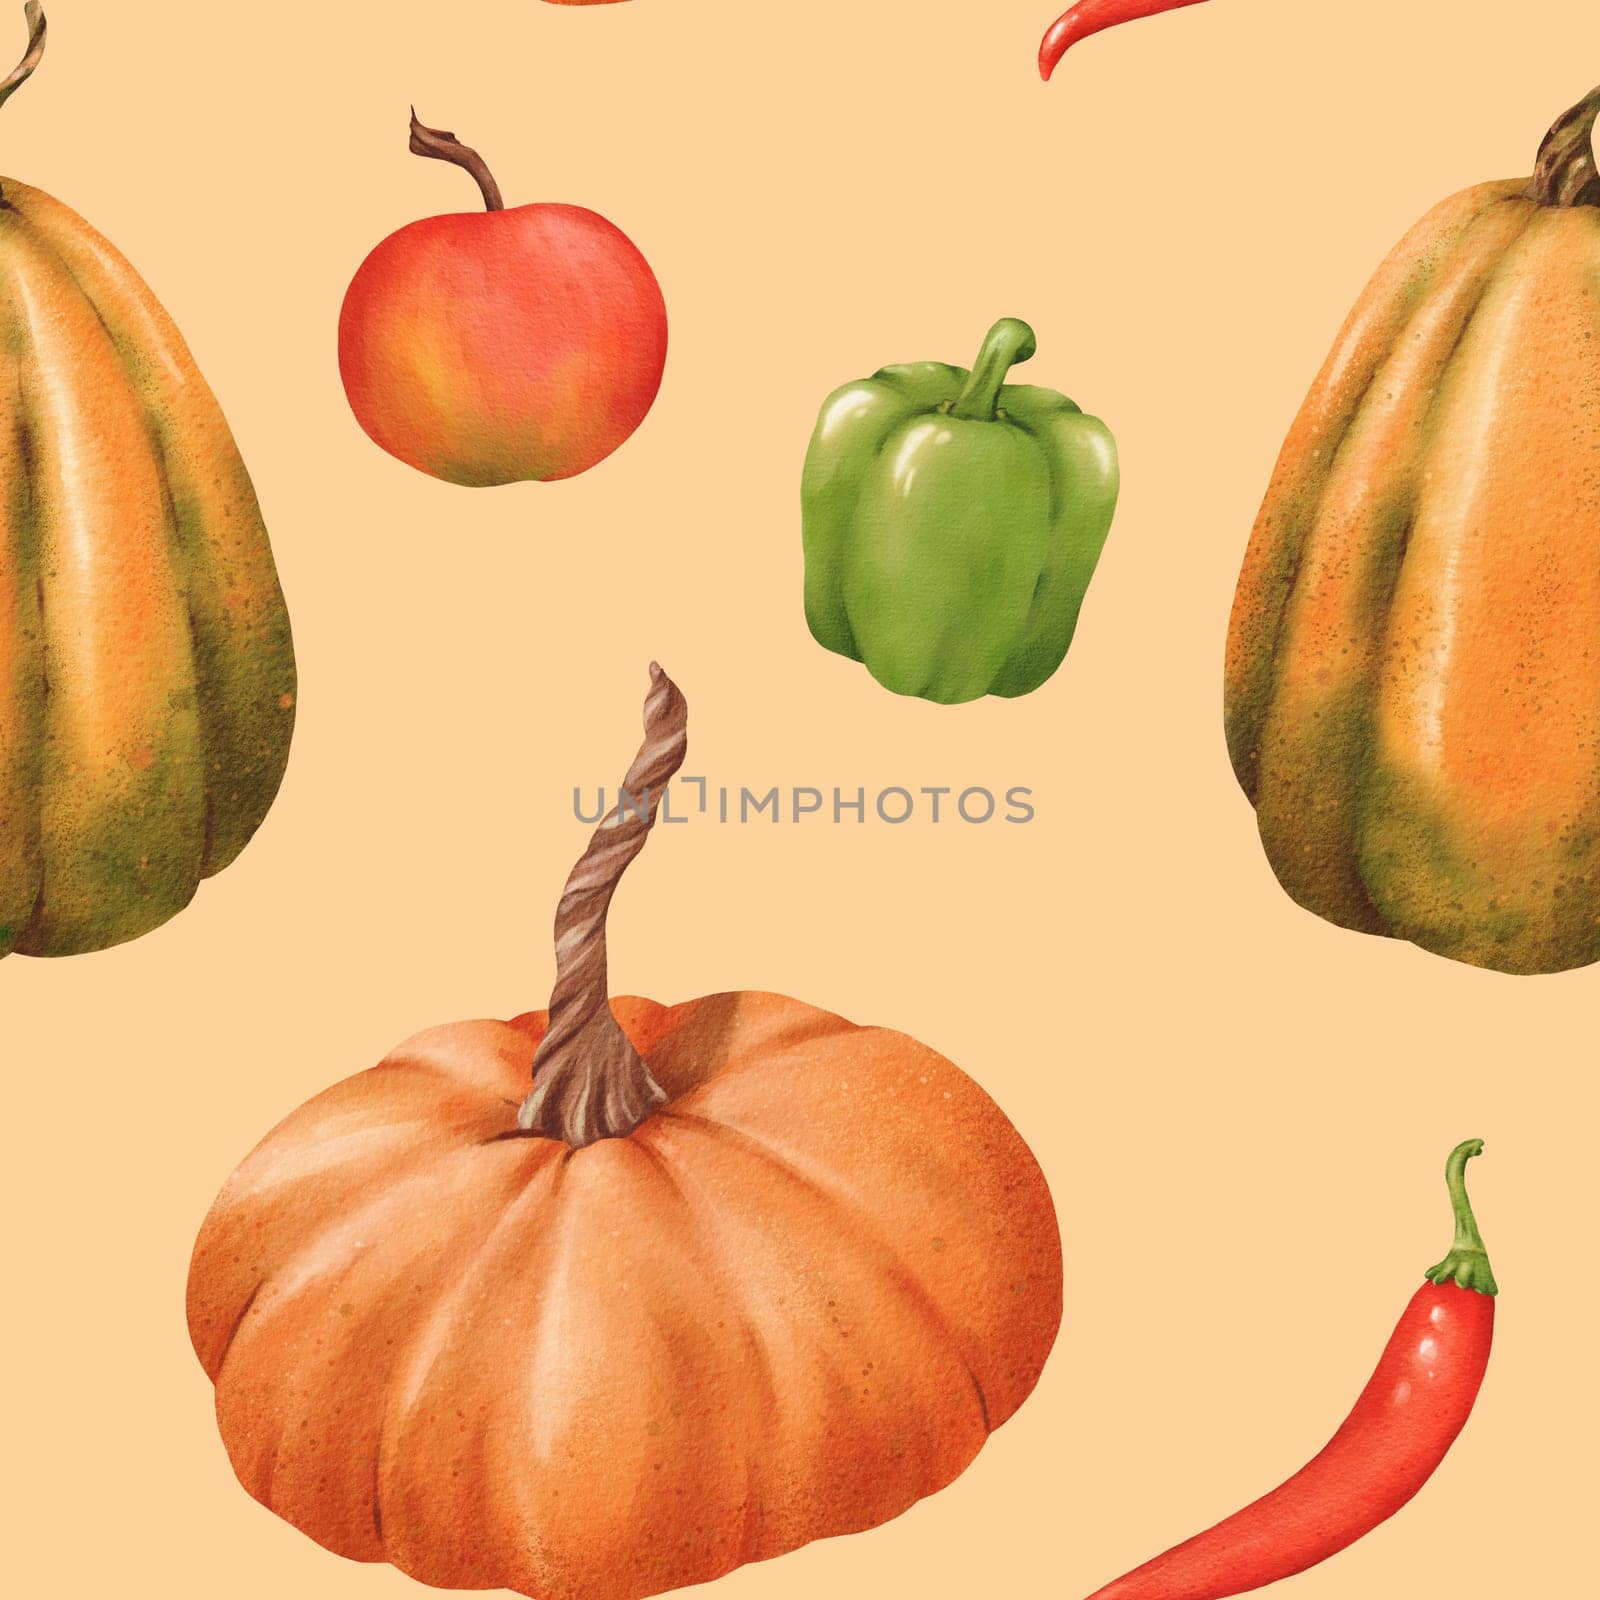 Seamless pattern of Pumpkins apples, pepper paprika chili. Watercolor illustration. Autumn harvest. Delicious ripe vegetable. Vegetarian raw food. For posters, websites, notebooks, textbooks.